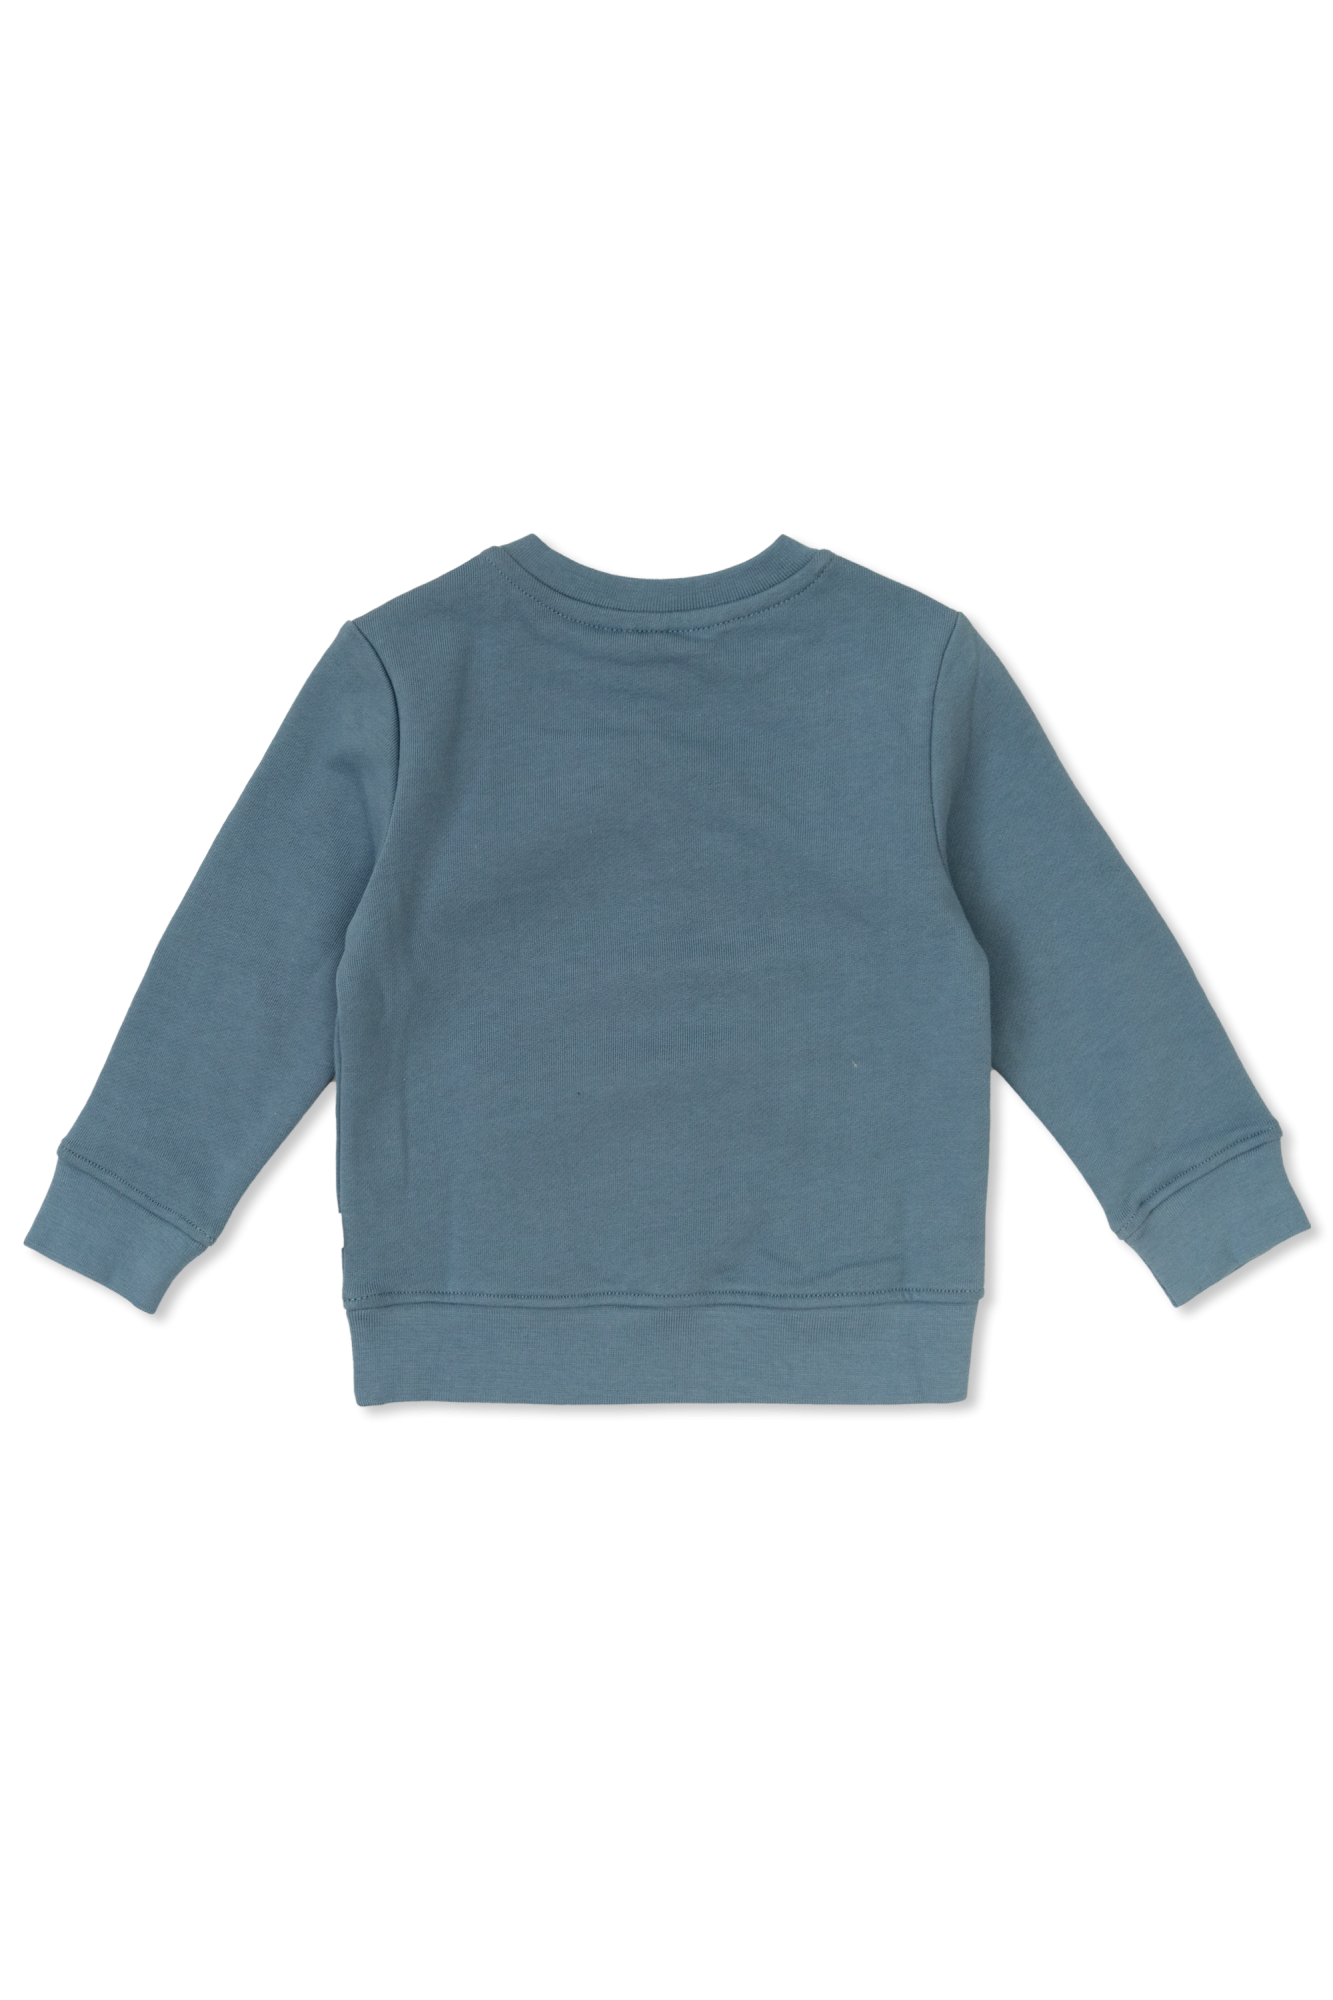 Stella McCartney Kids Stella McCartney Kids Sweatshirt with Print